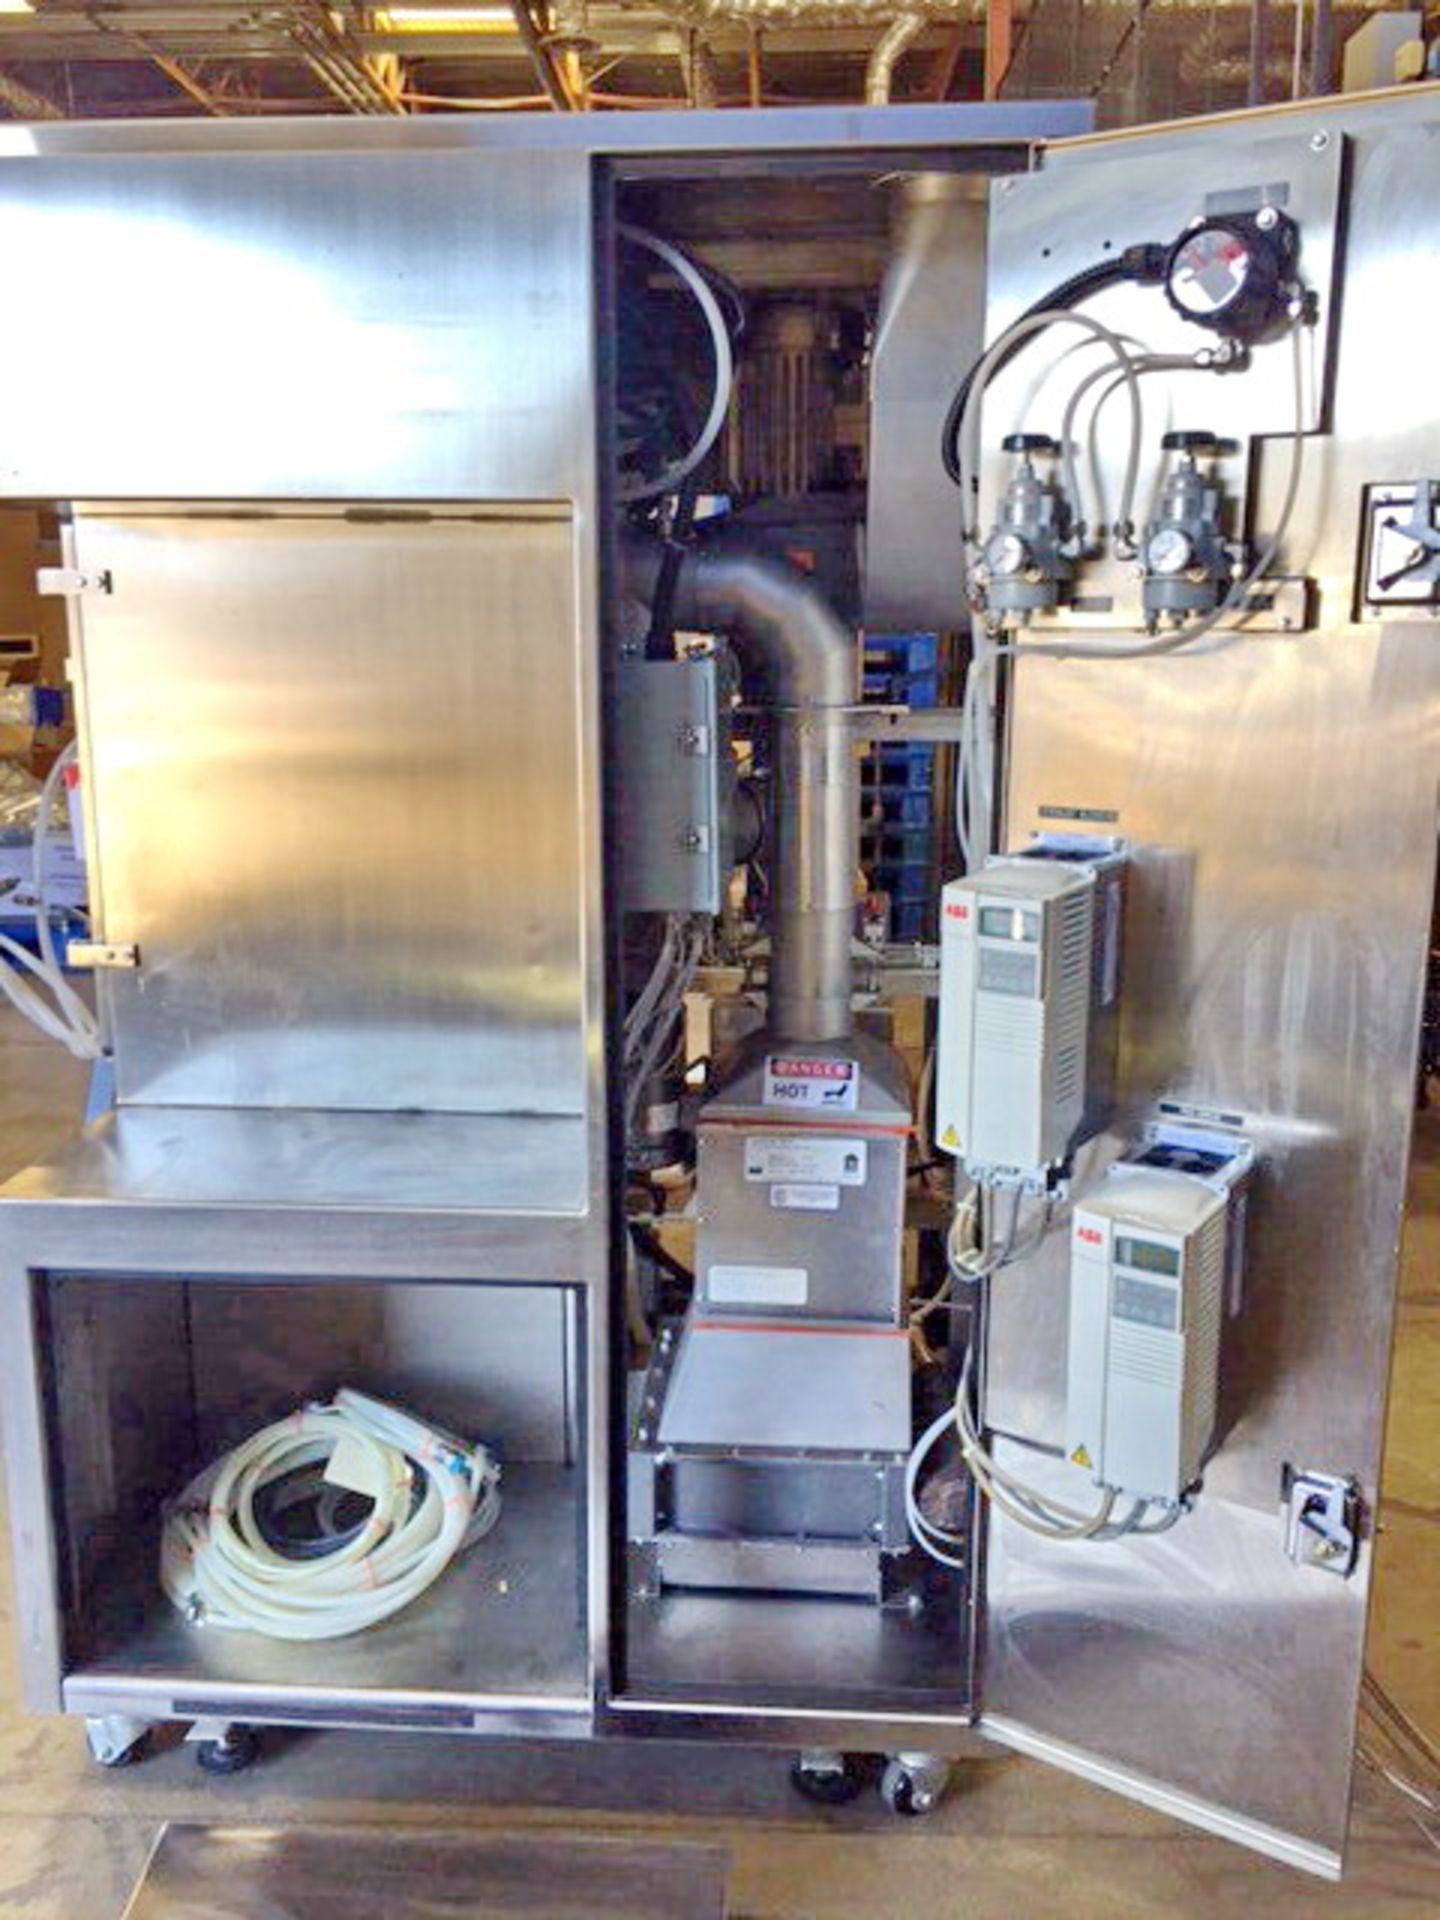 Thomas Accela Cota Coating System, Model Compulab 24, with 15” and 12" pans - Image 8 of 13